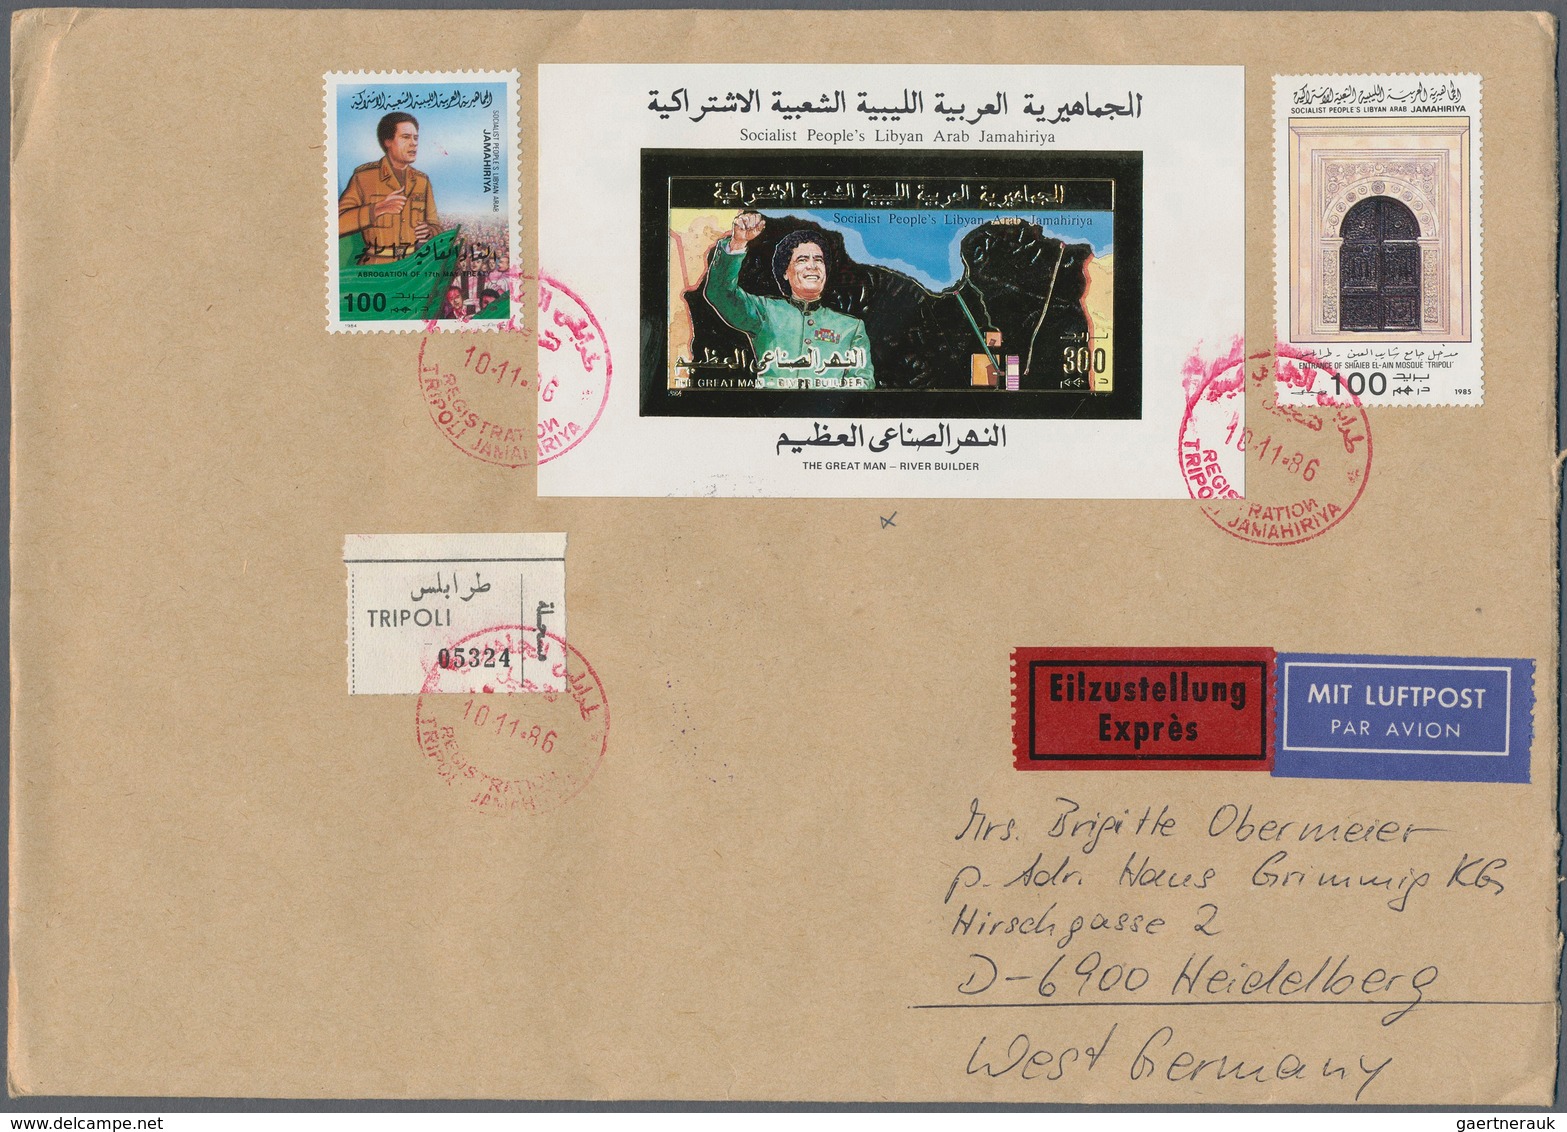 Libyen: 1912/1990 (ca.), holding of apprx. 150 covers/cards from some Italian period incl. a 1912 po